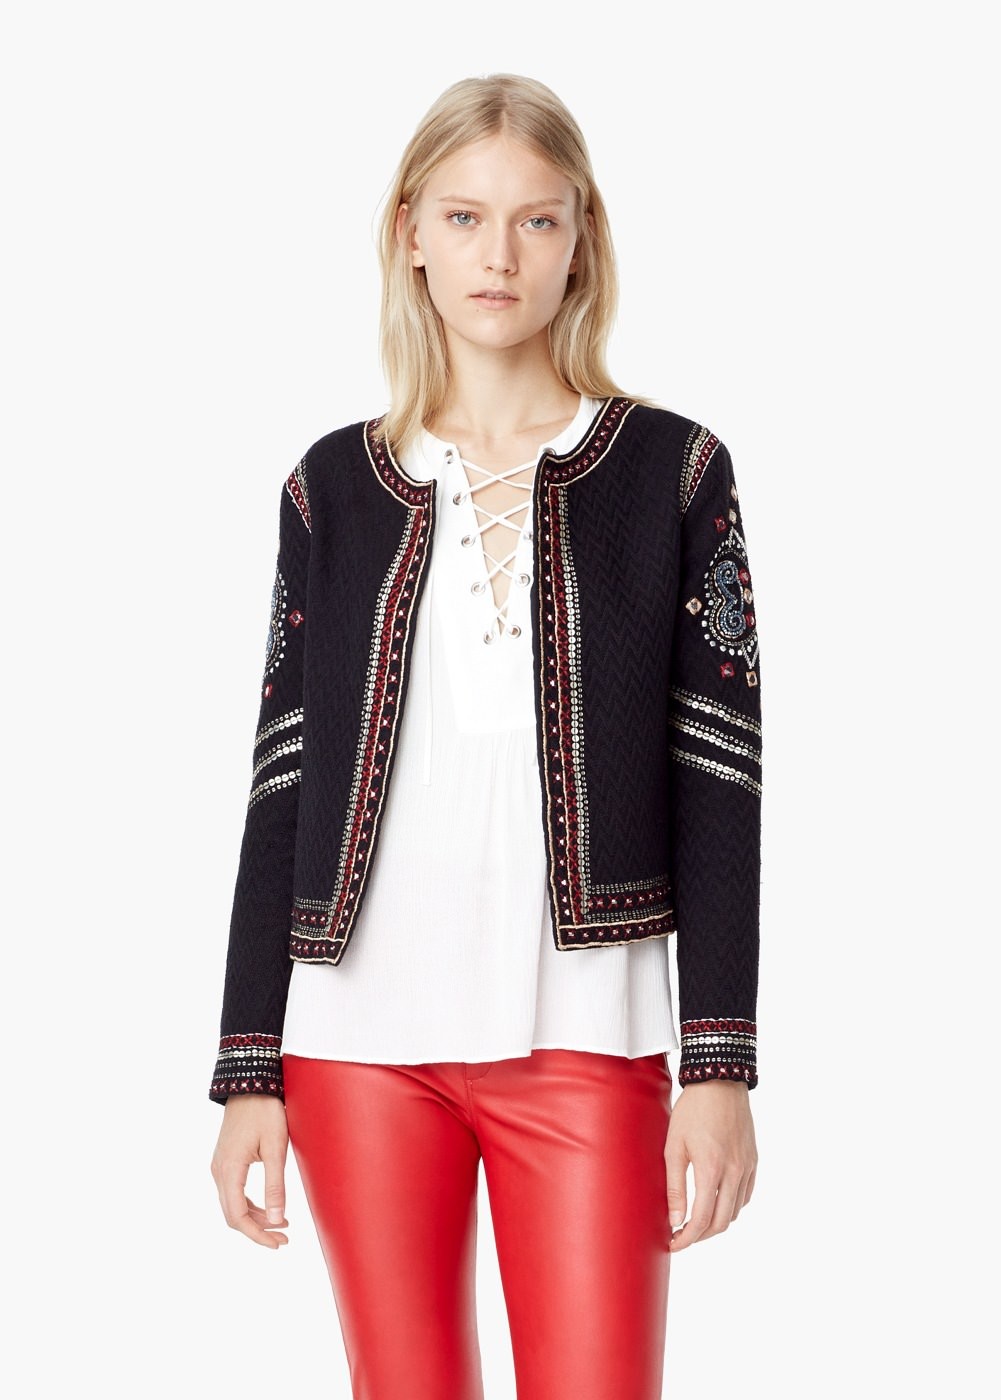 Embroidered Jackets | The London Mummy